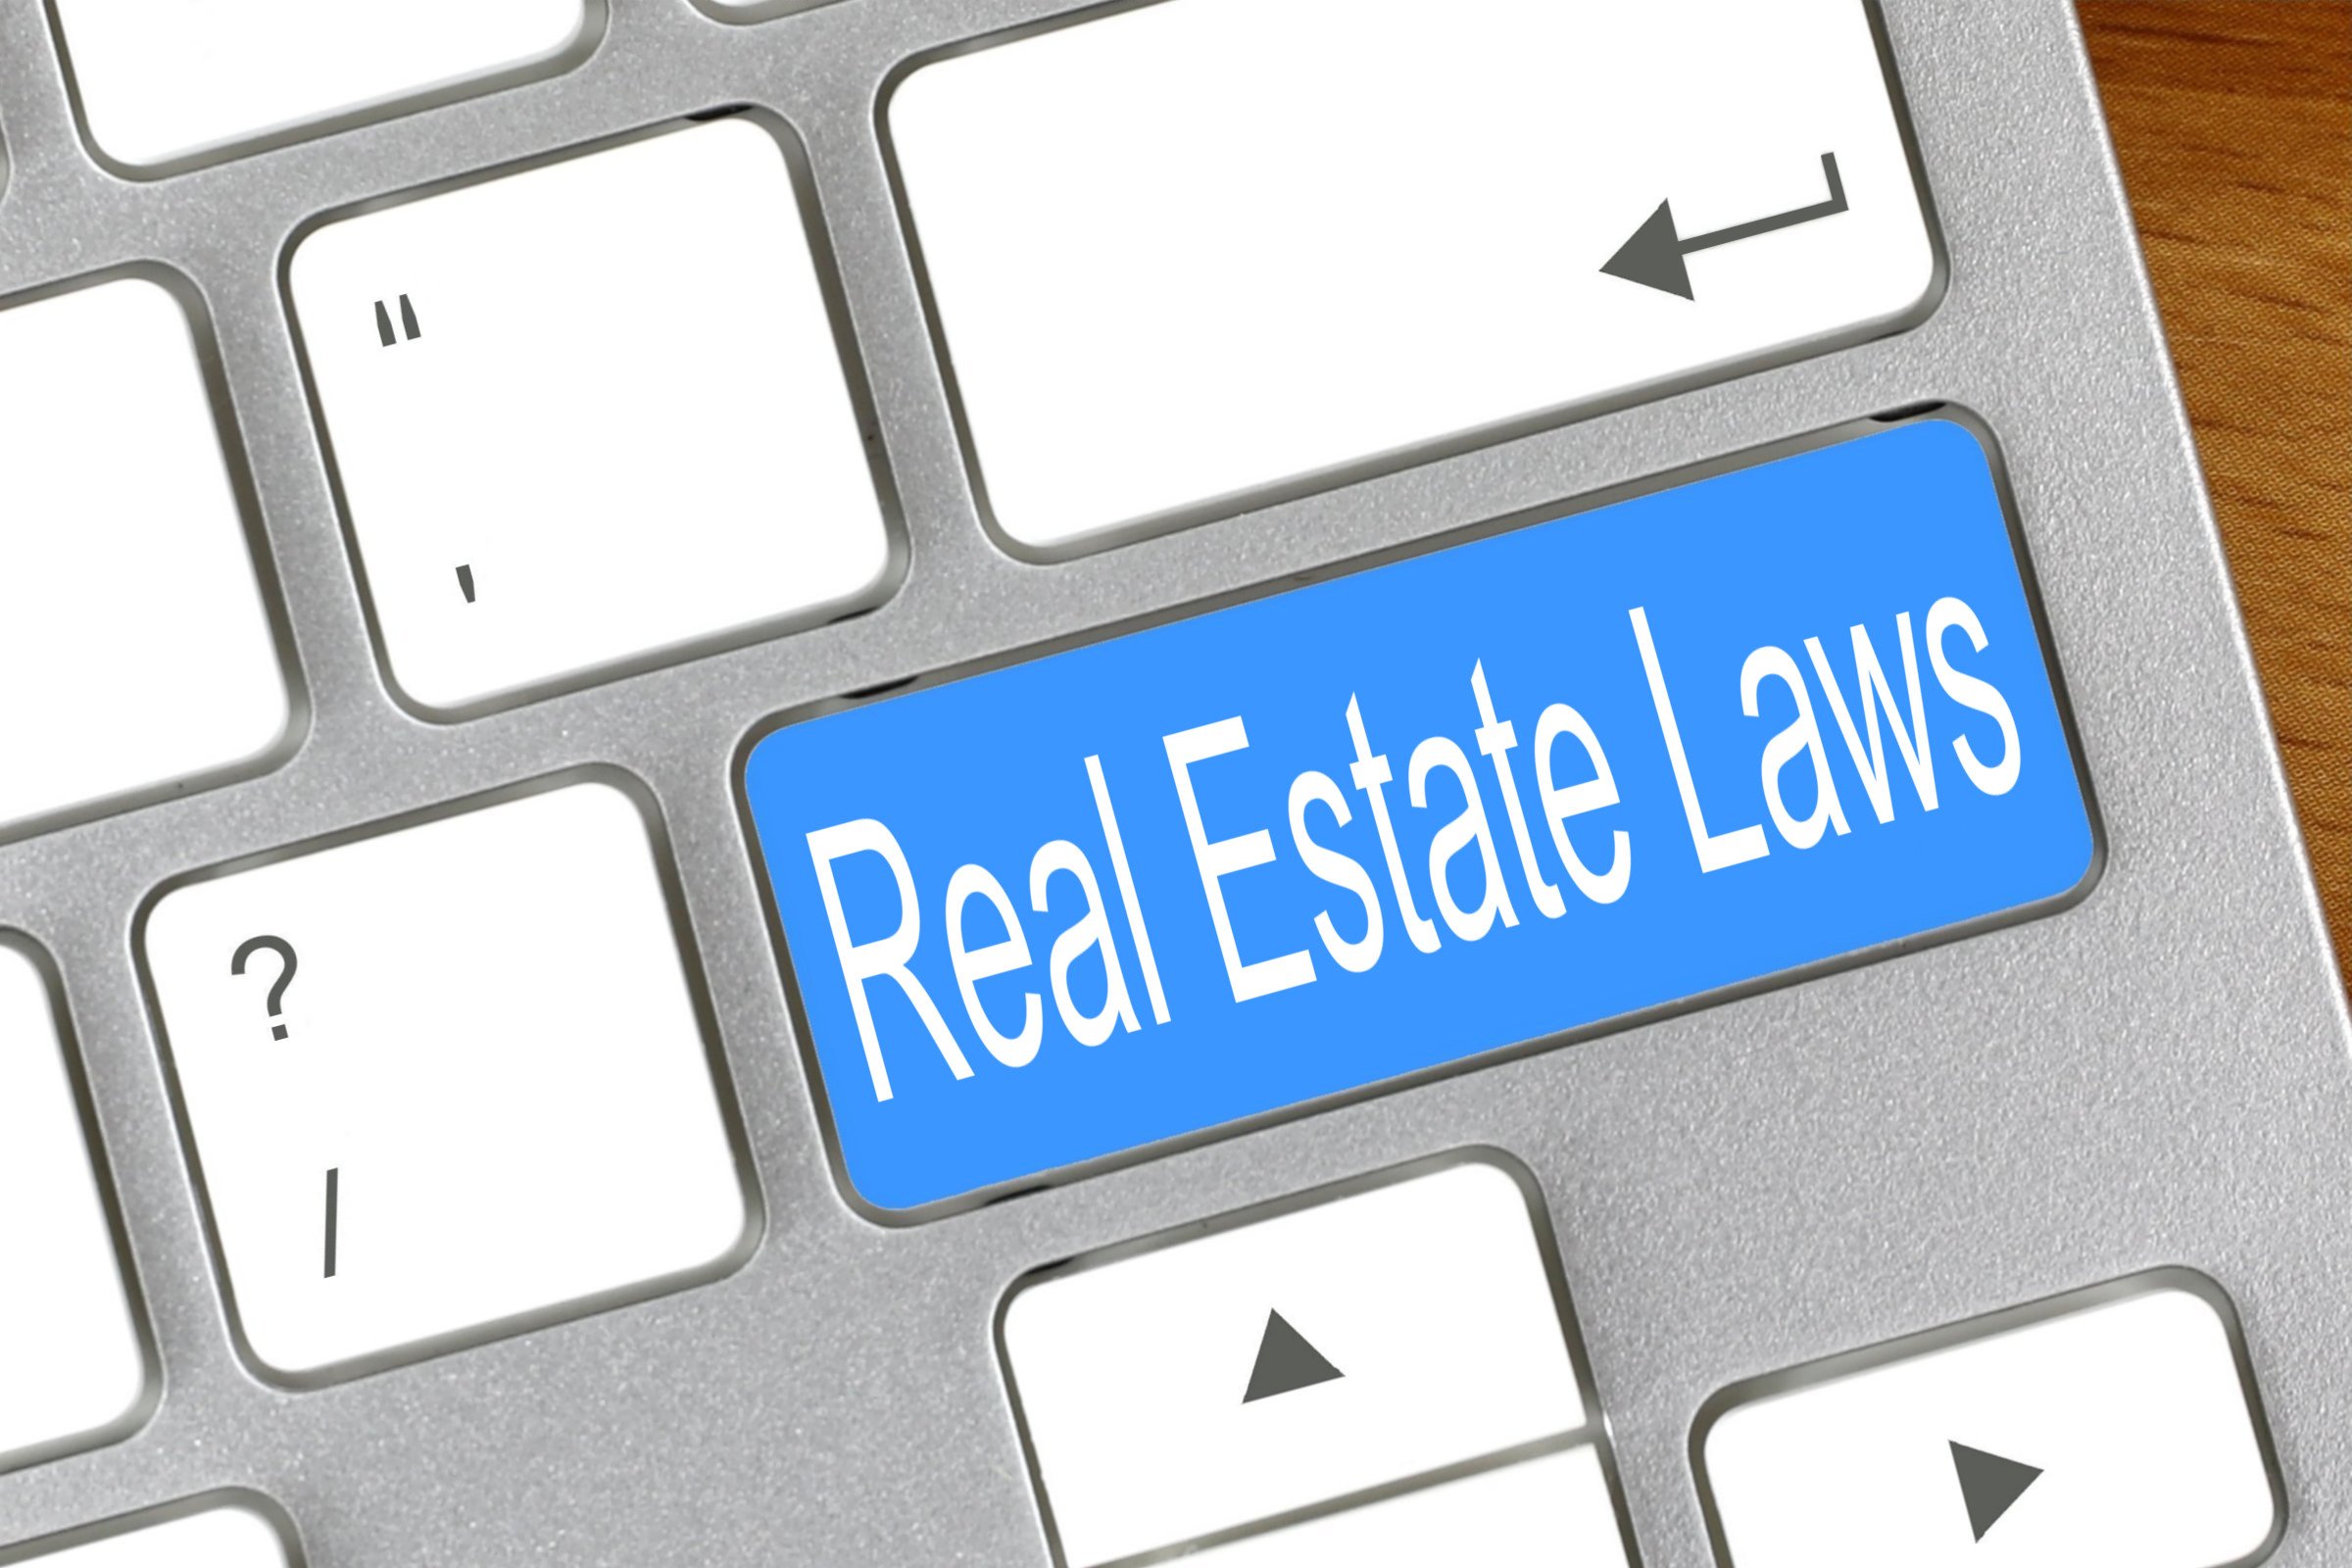 real estate laws